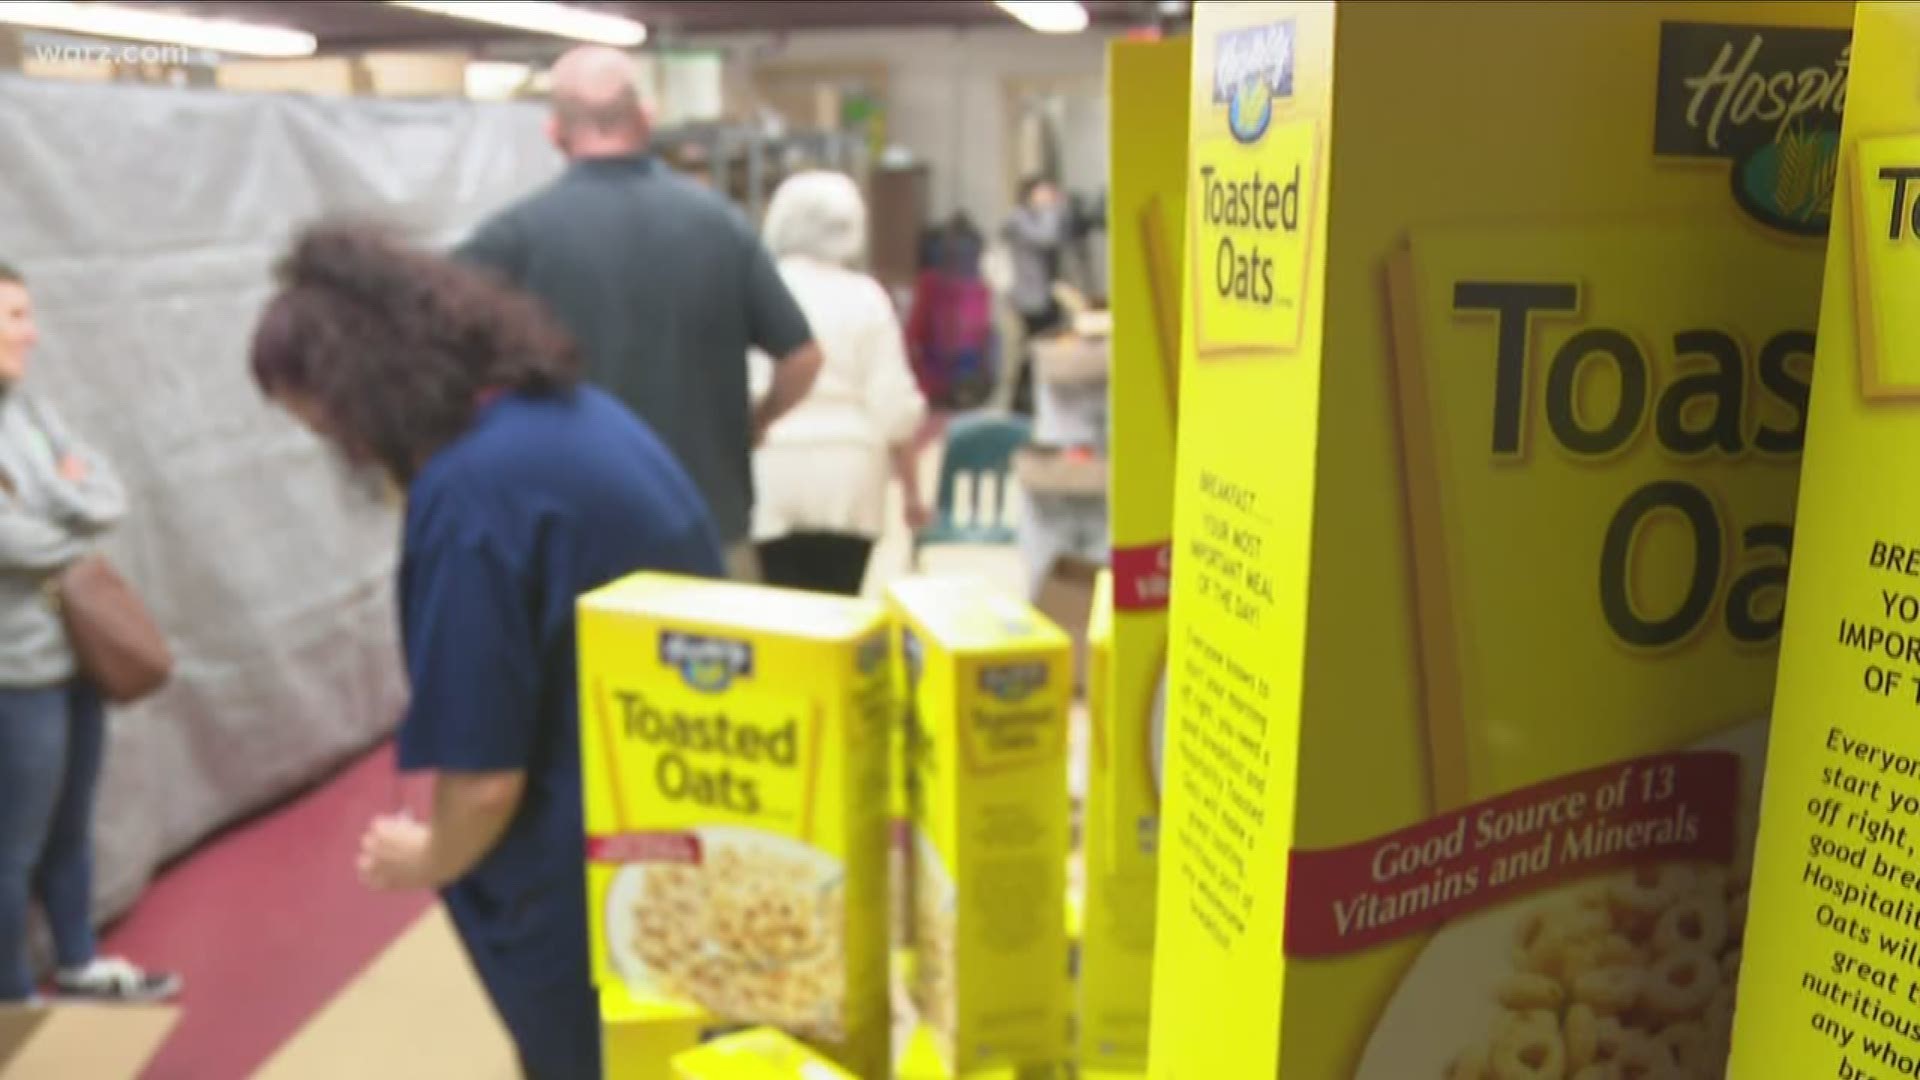 The group "Feedmore Western New York" held a mobile food pantry event up in Lockport...